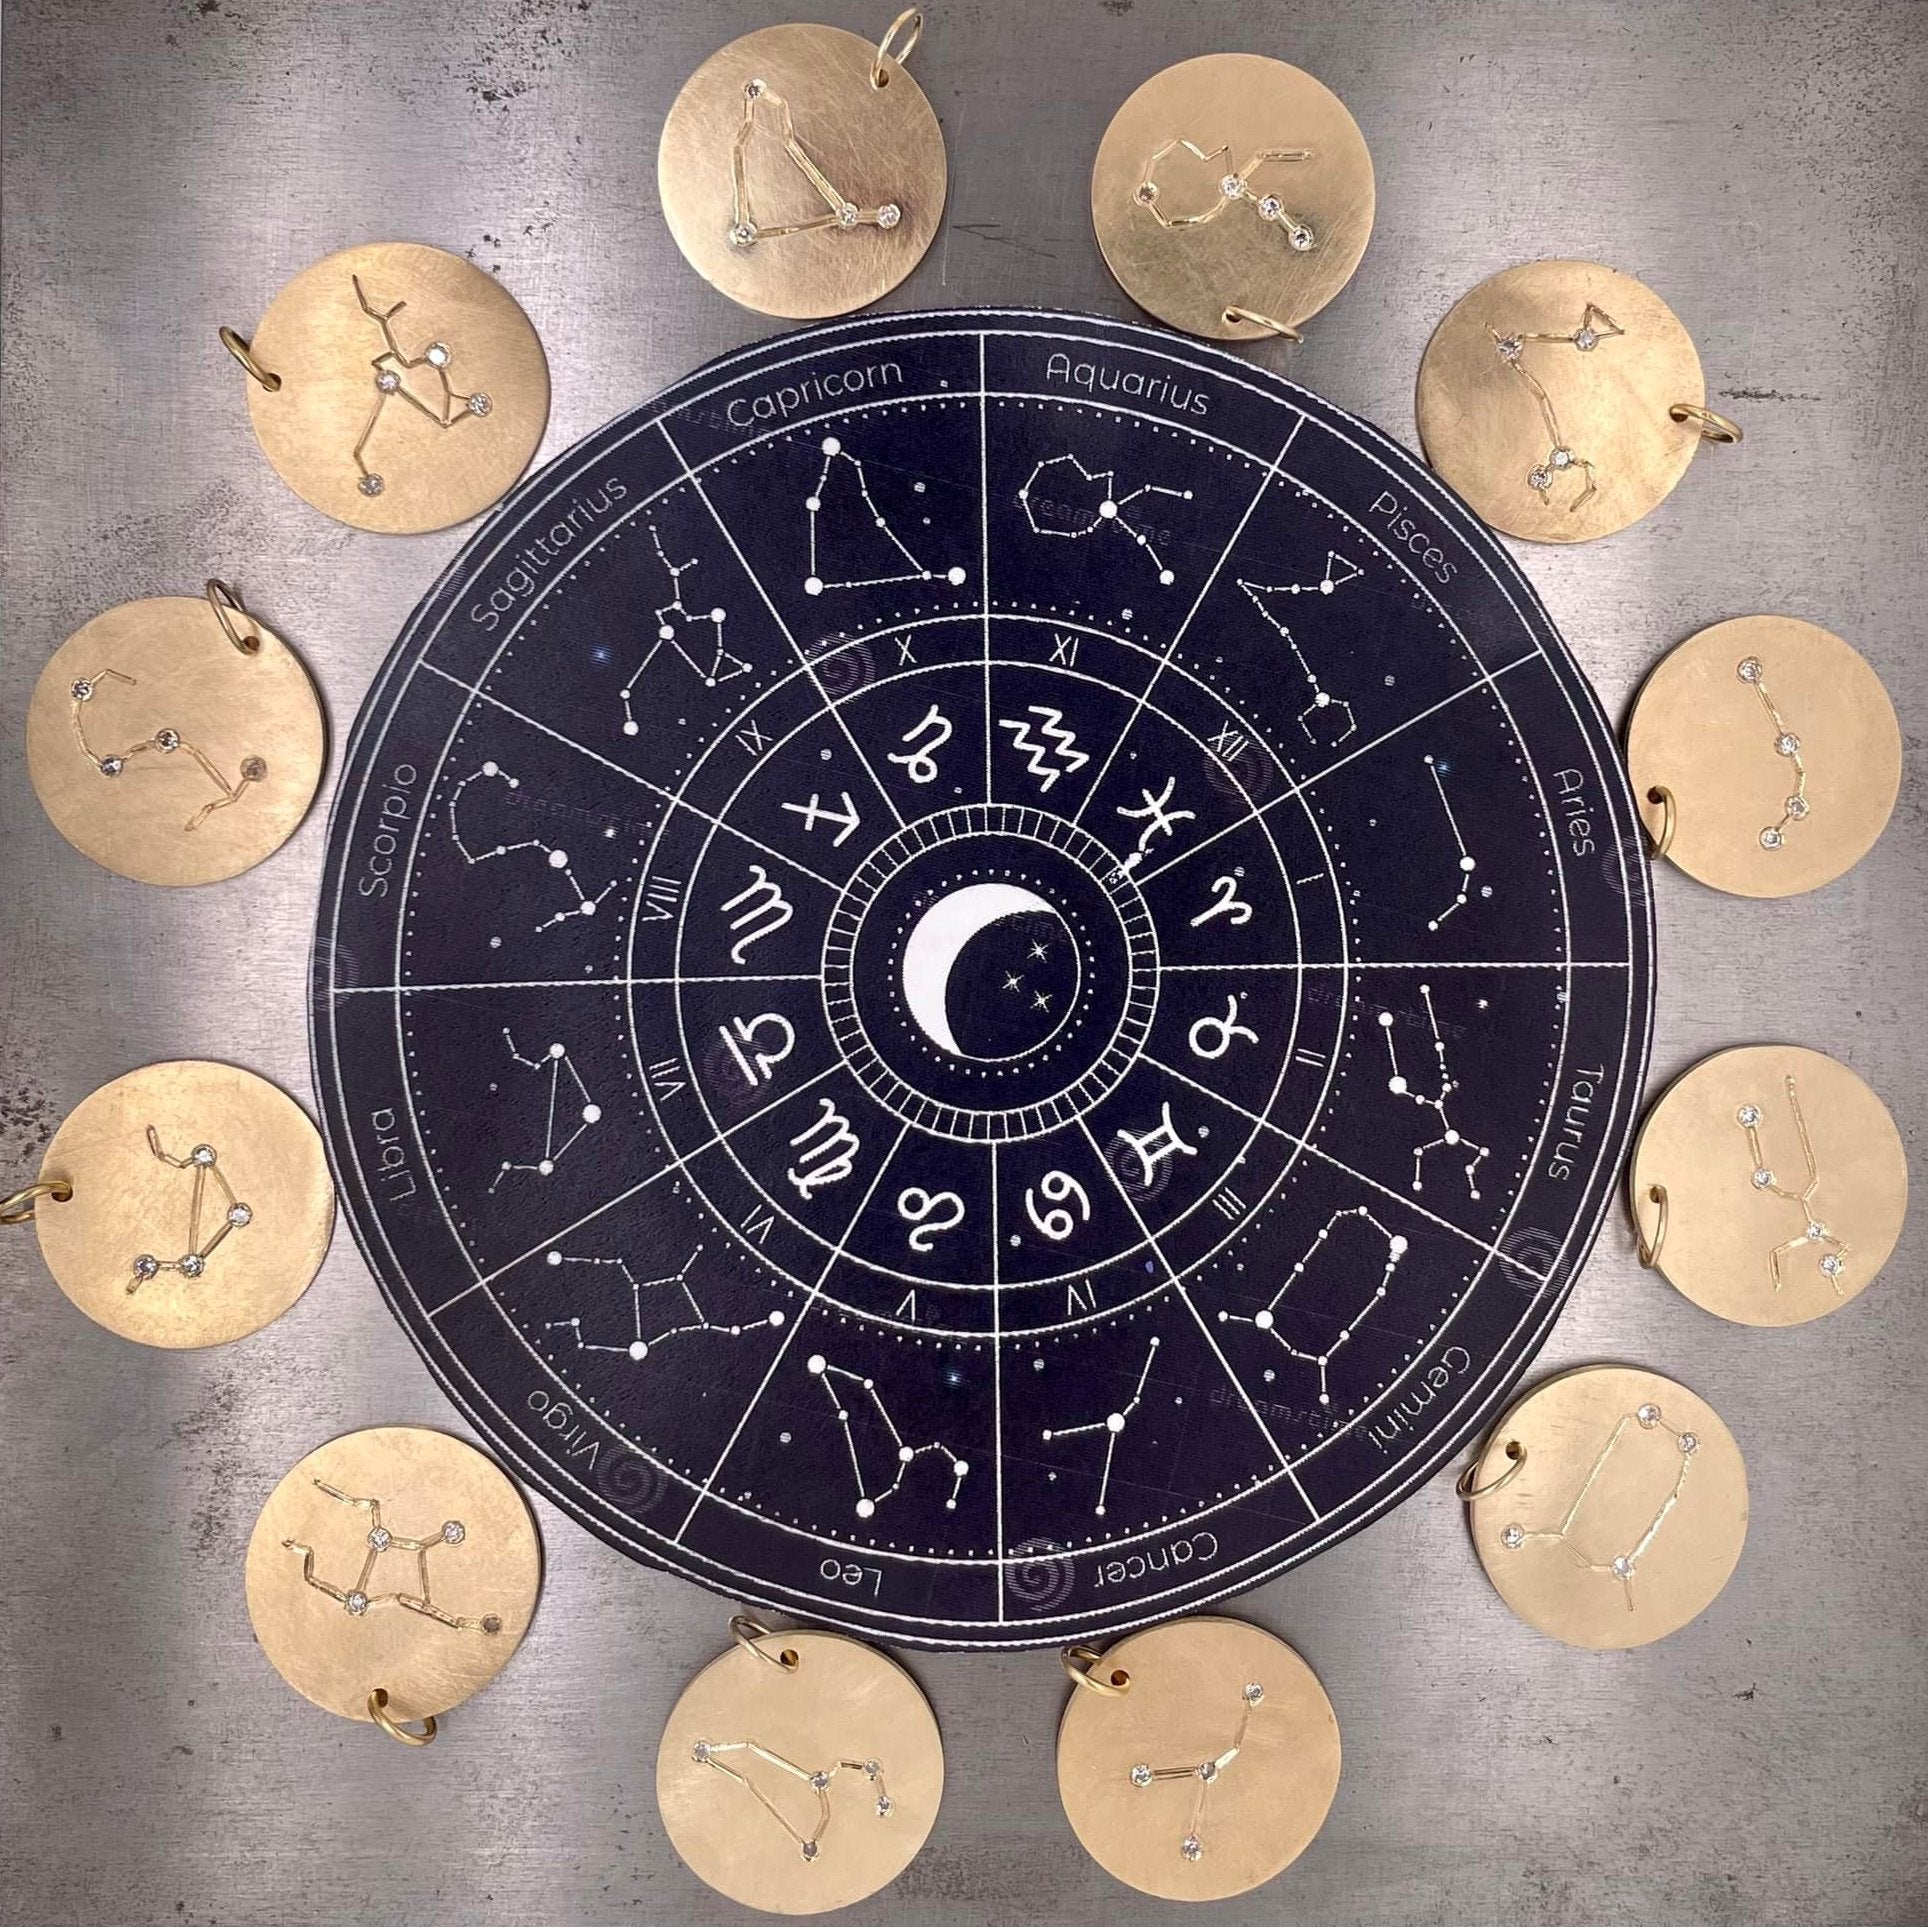 Full image of 12 zodiac pendants that surround a dial of paper that outlines each zodiac symbol.